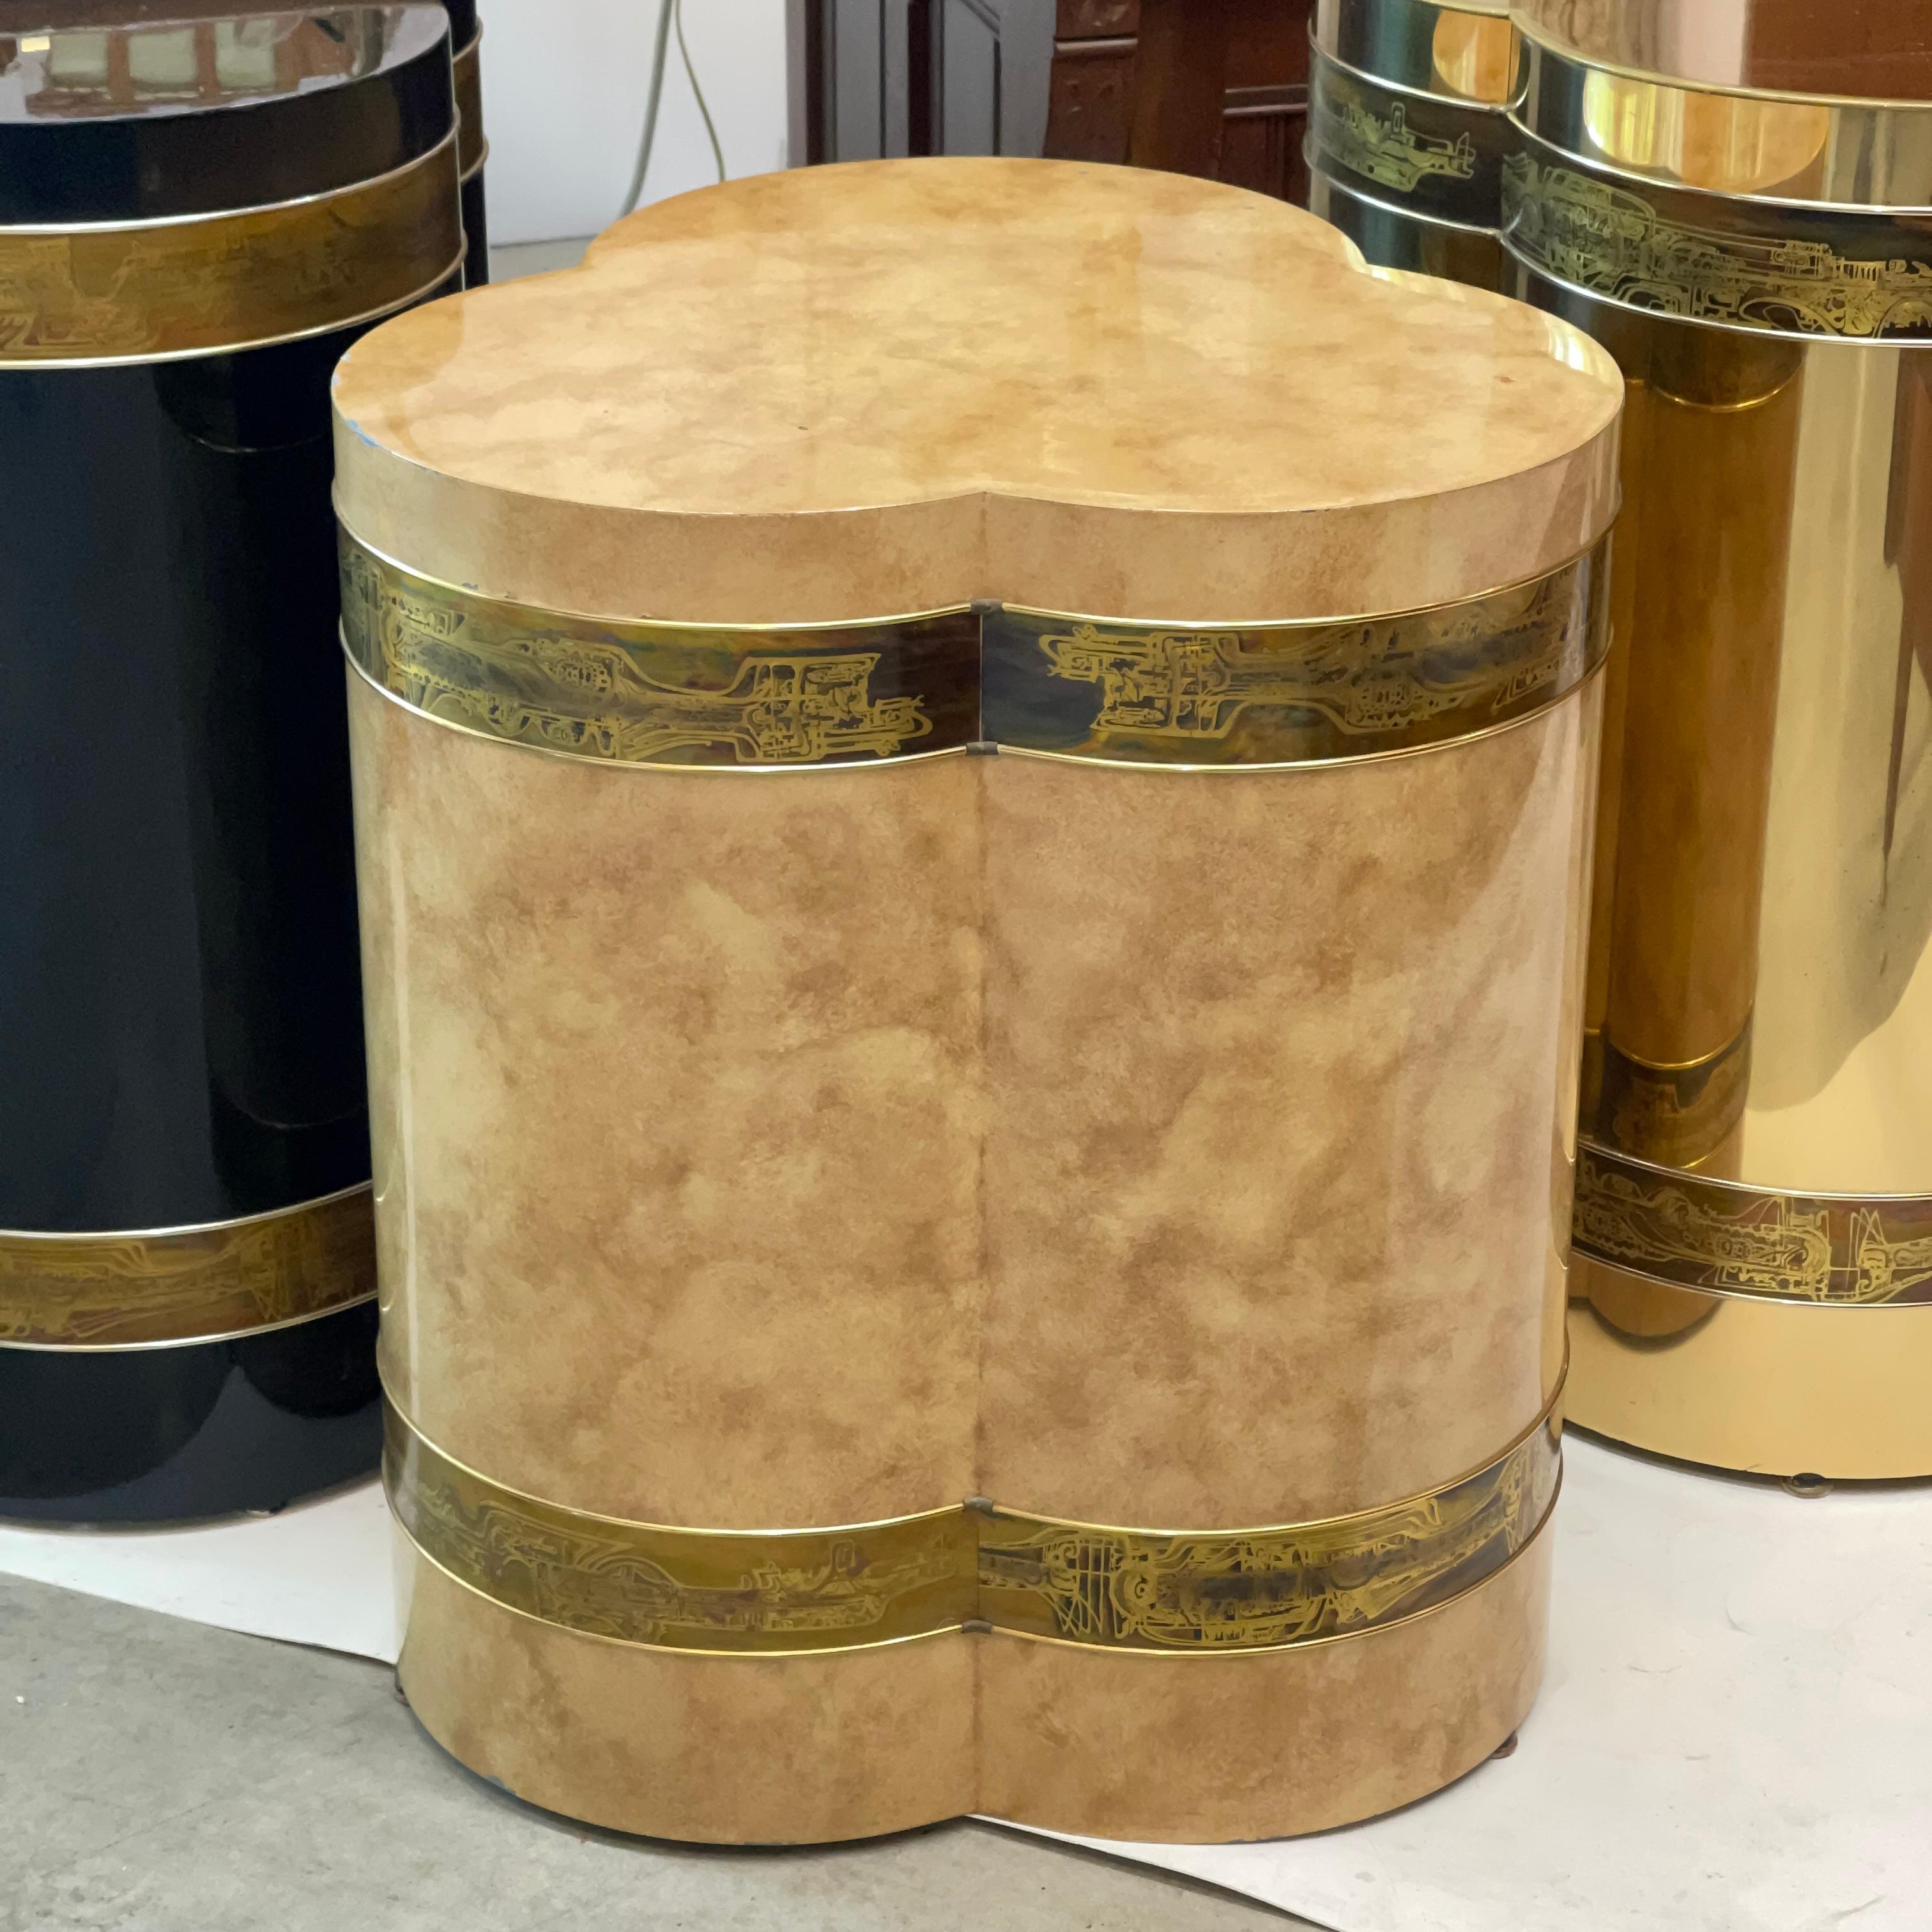 Mastercraft trefoil trifoliate clover shaped pedestal drum table base in original lacquered faux parchment finish with double band of acid etched brass by metal artist, Bernhard Rohne. 
This 24 inch high version is referred to as a lamp table in